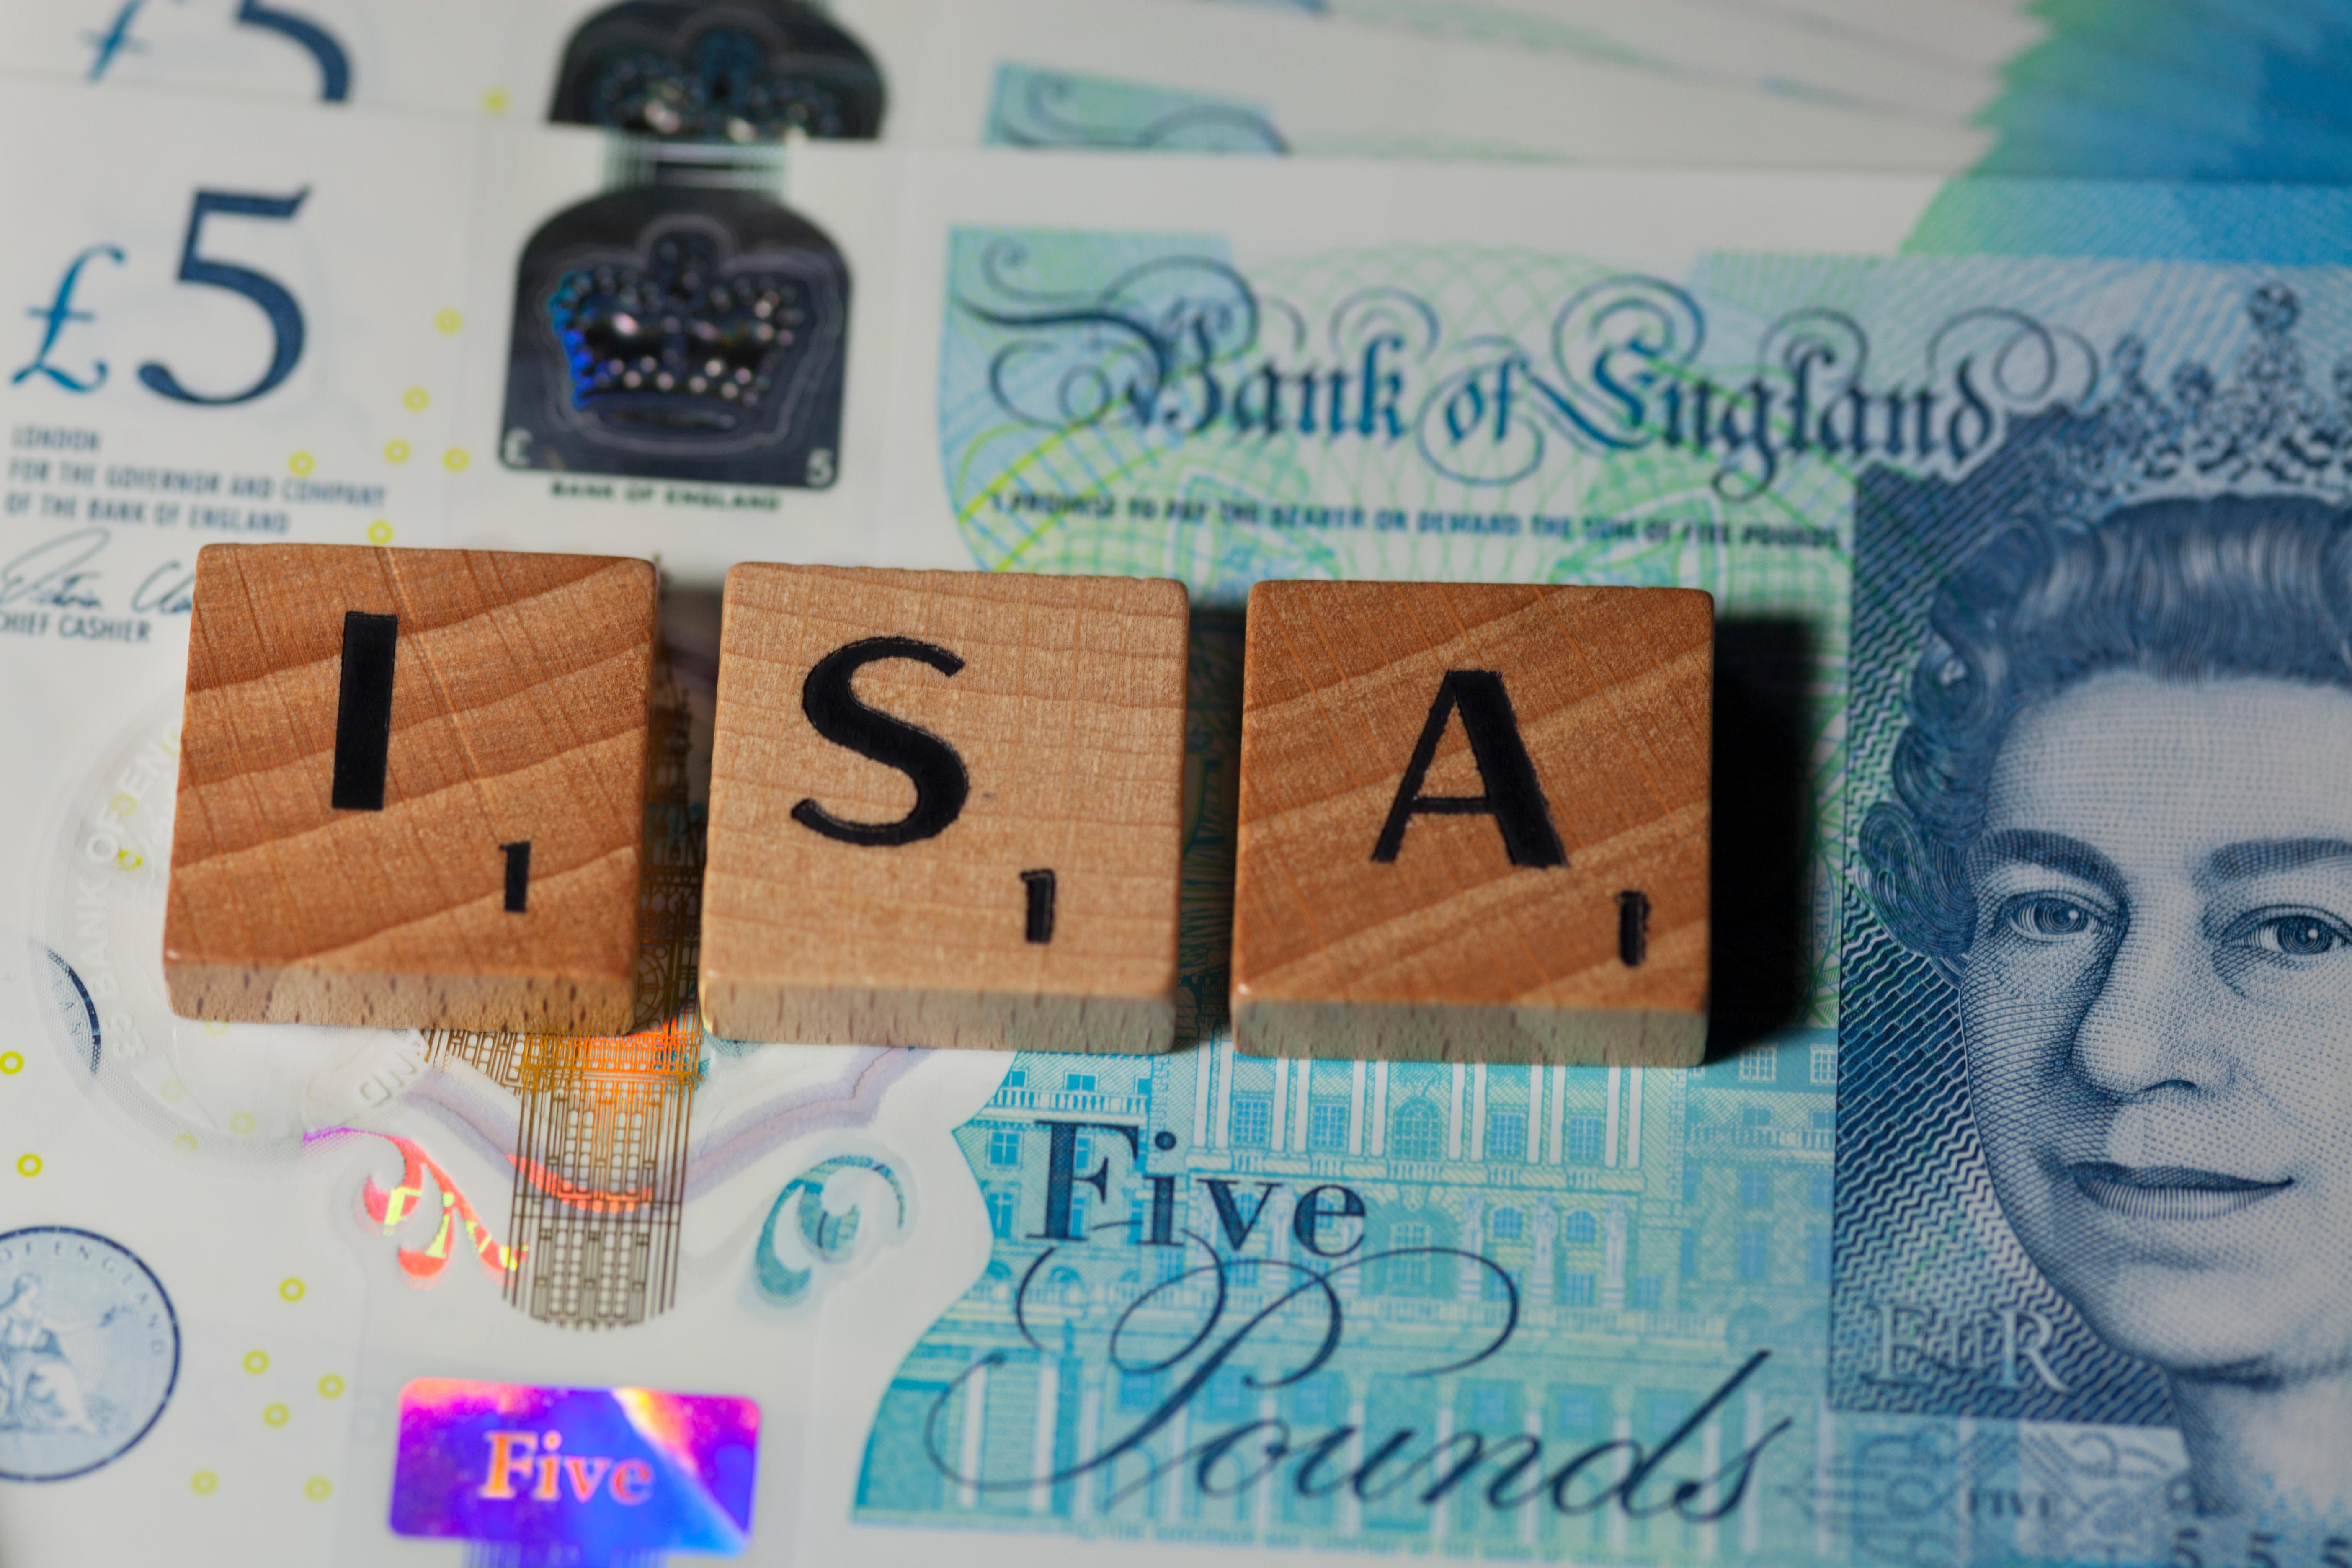 ISA spelled on banknotes